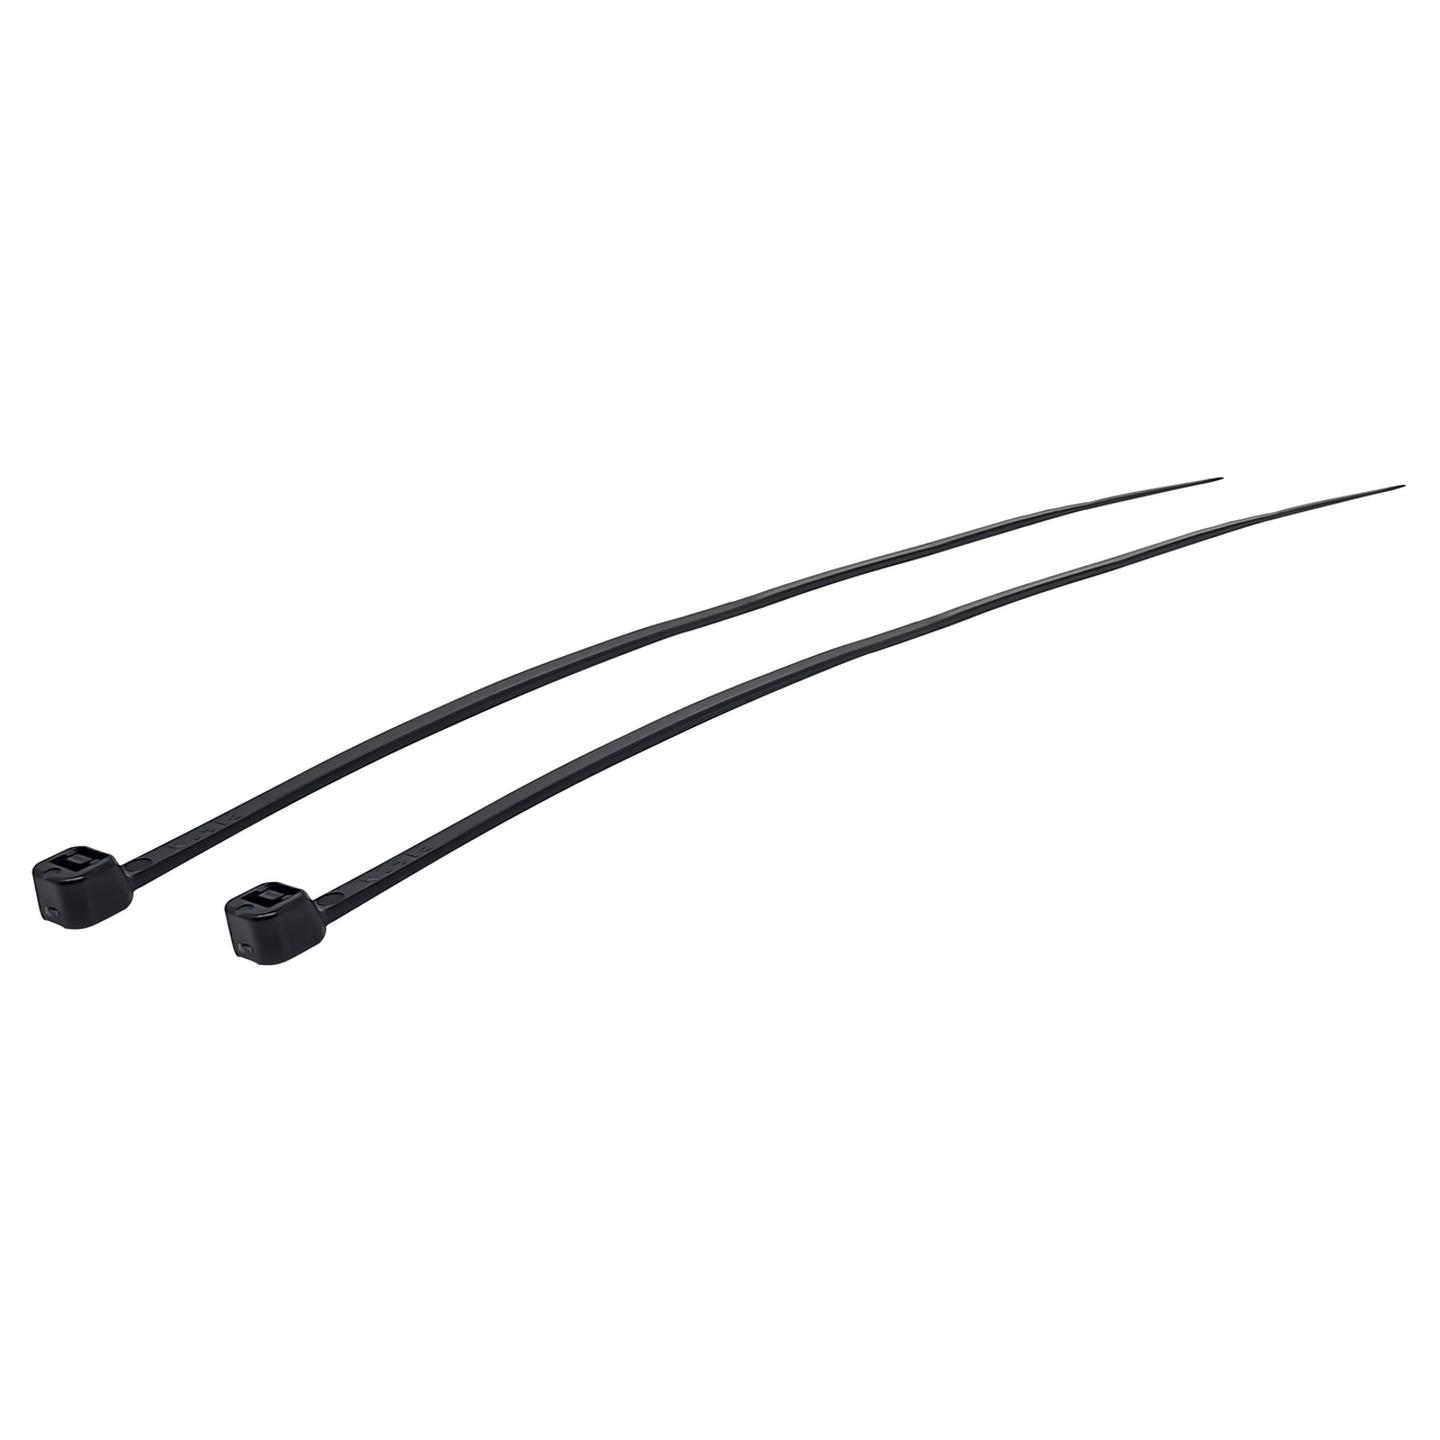 Cable Tie 300mm x 4.8mm pack of 500